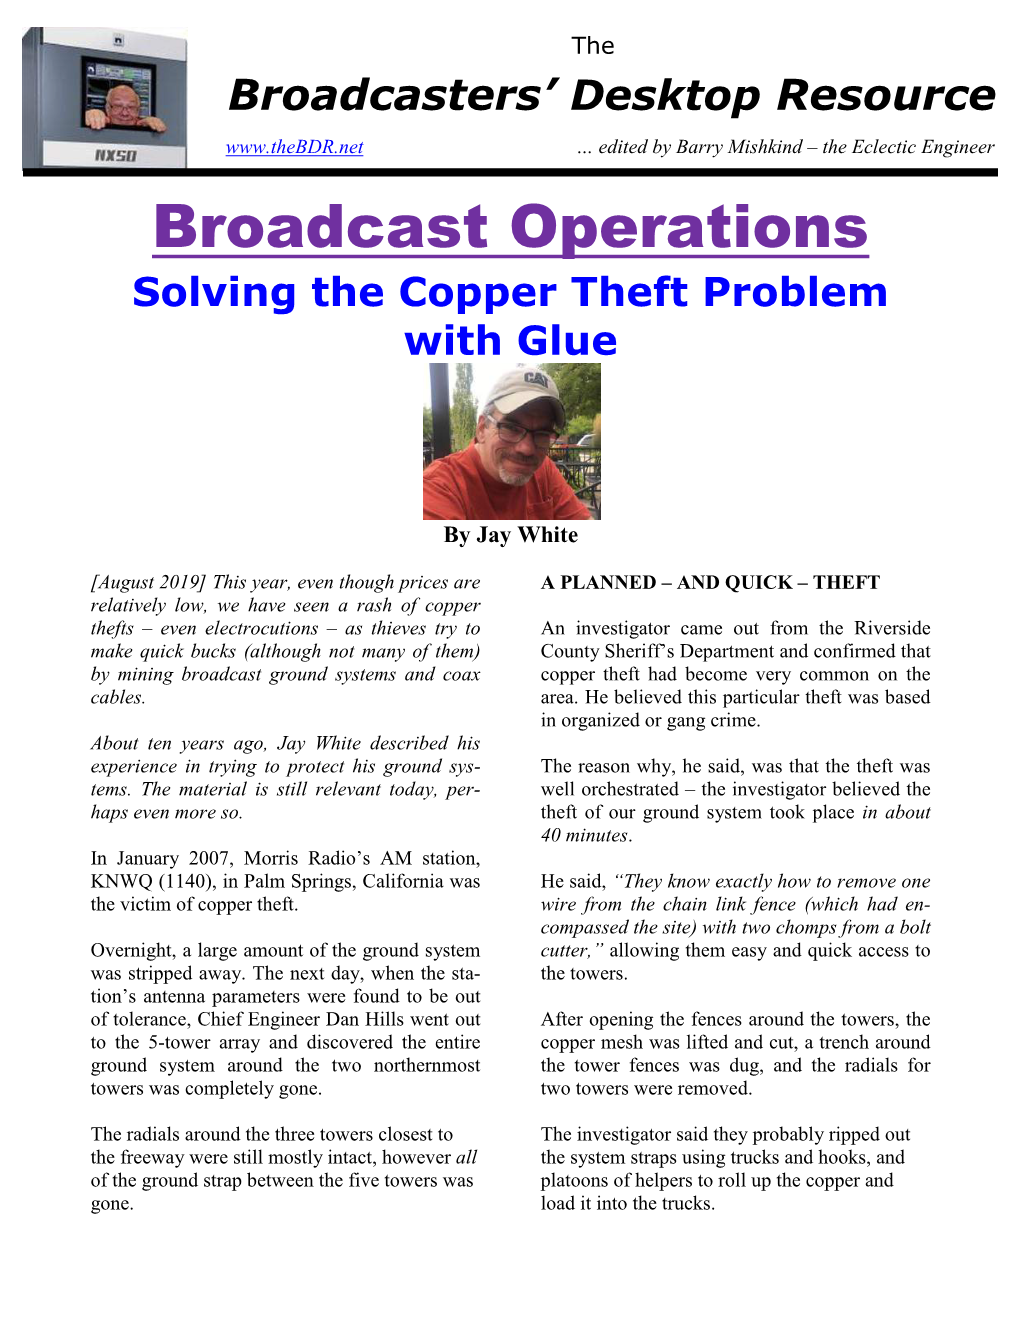 Broadcast Operations Solving the Copper Theft Problem with Glue